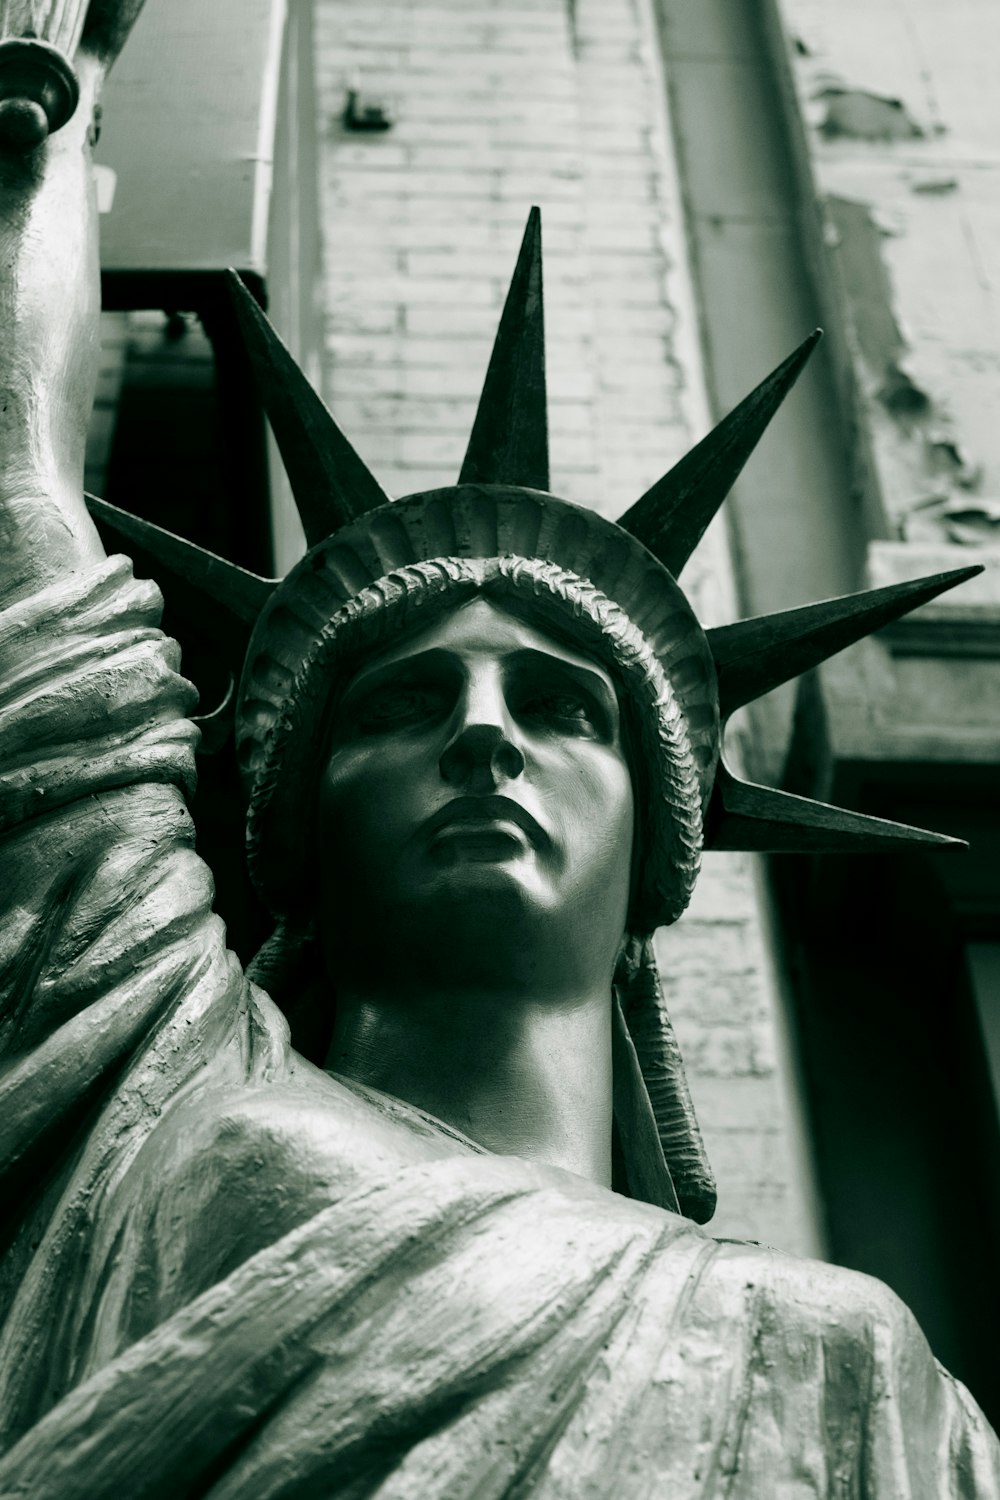 statue of liberty in new york city